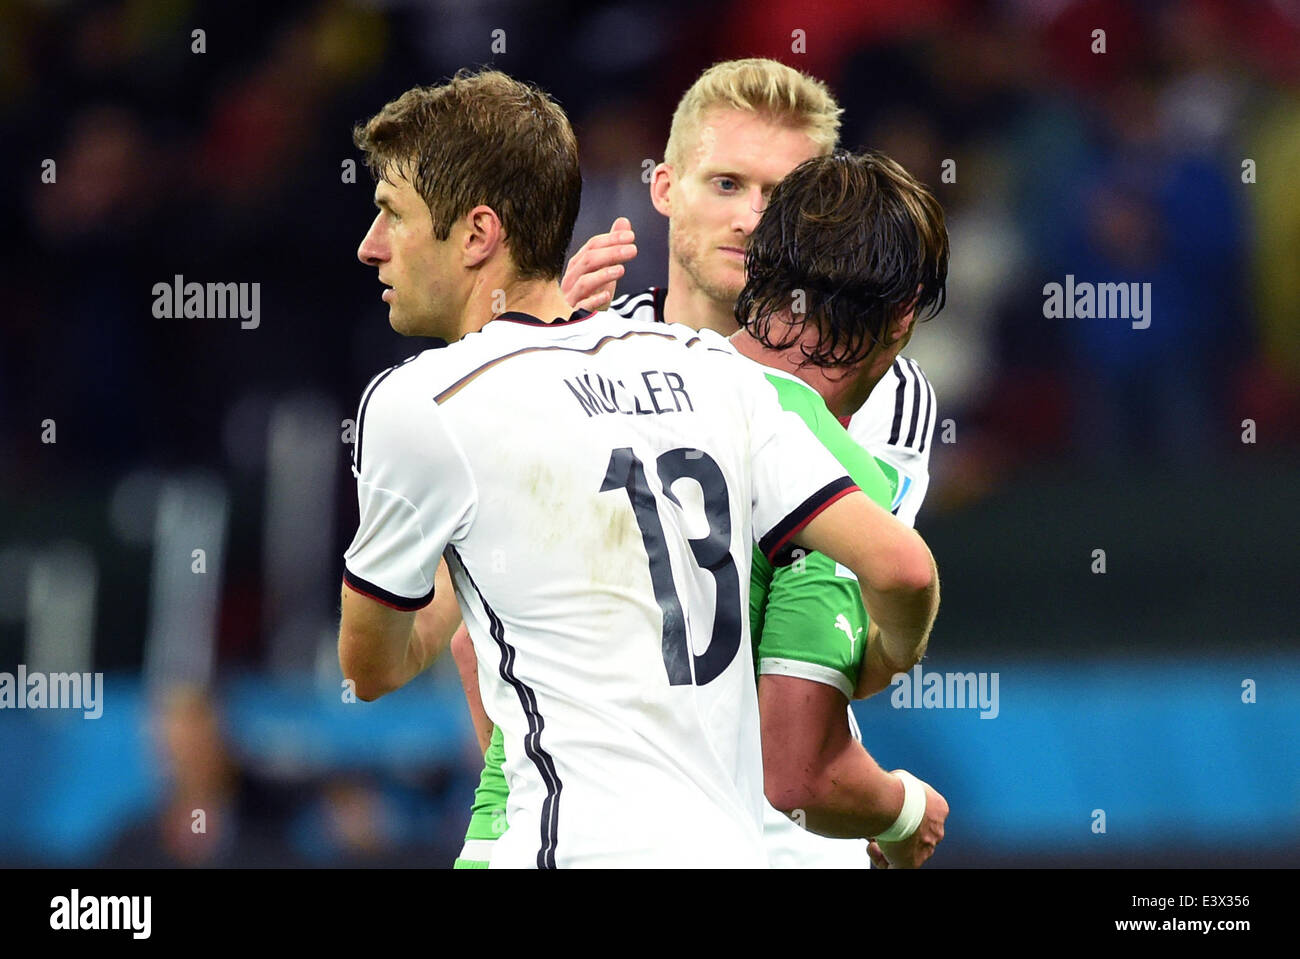 Porto Alegre, Brazil. 30th June, 2014. Germany's Thomas Mueller (L-R) and Andre Schurrle try to comfort Algeria's Mehdi Mostefa after the FIFA World Cup 2014 round of 16 soccer match between Germany and Algeria at the Estadio Beira-Rio in Porto Alegre, Brazil, 30 June 2014. Photo: Marcus Brandt/dpa/Alamy Live News Stock Photo